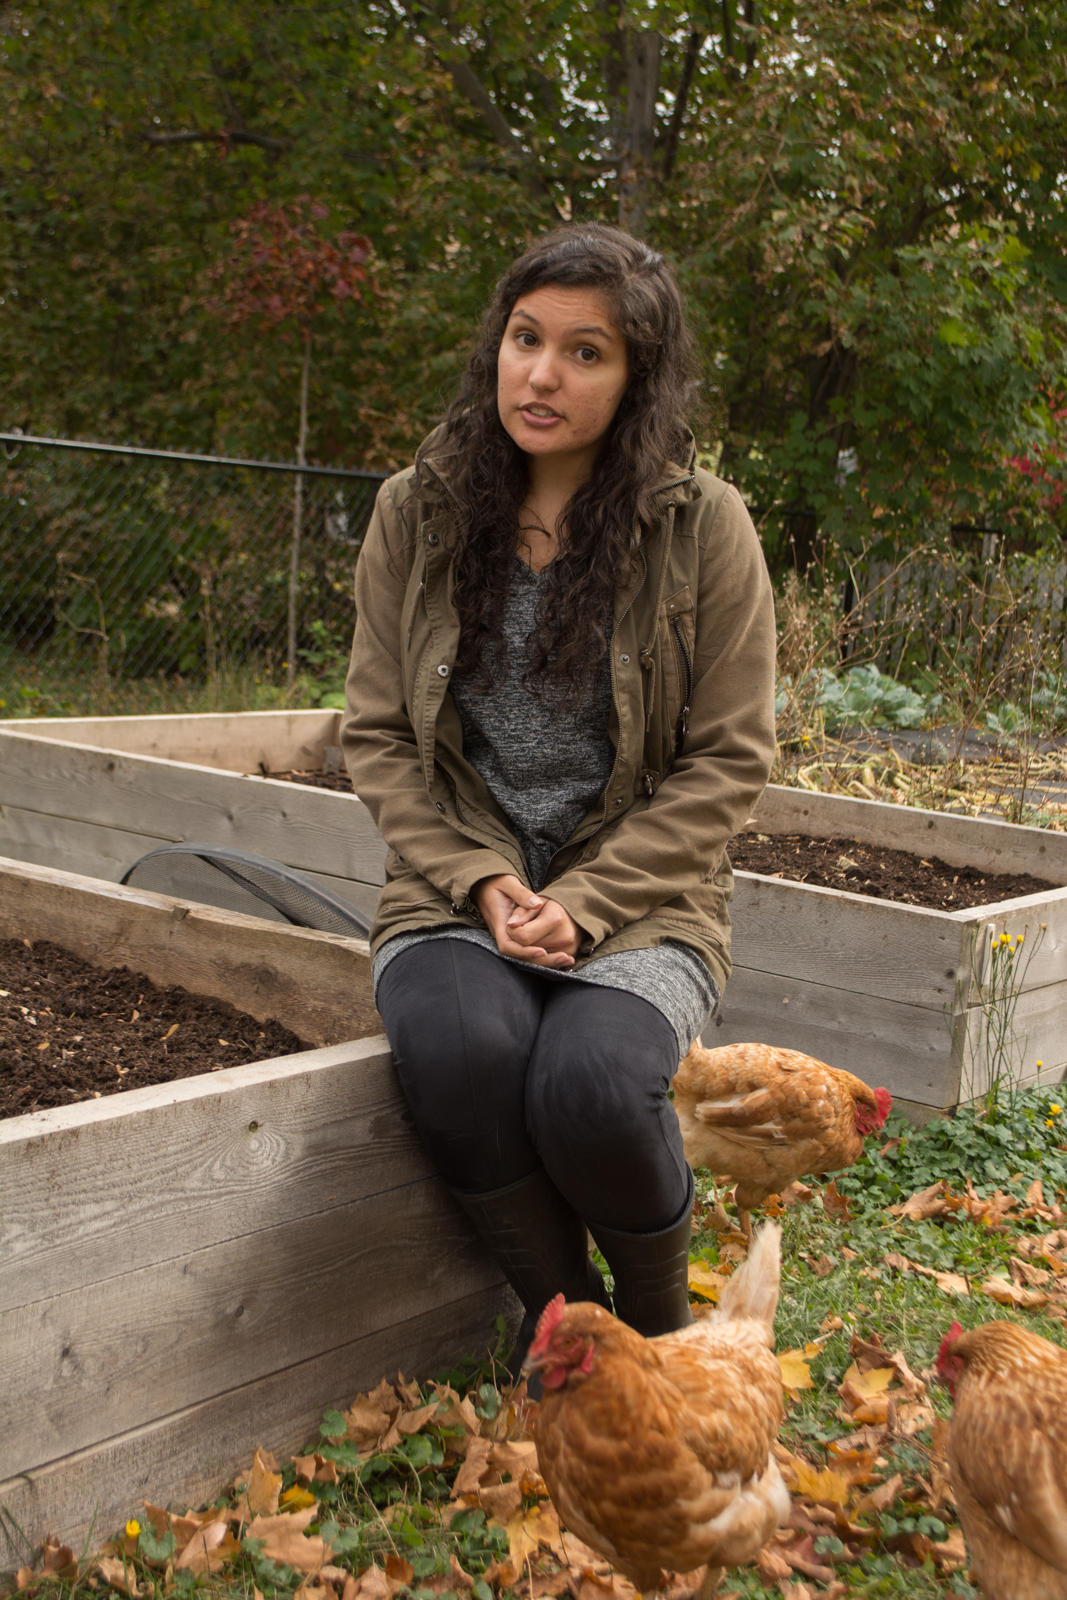 Alya with her chickens